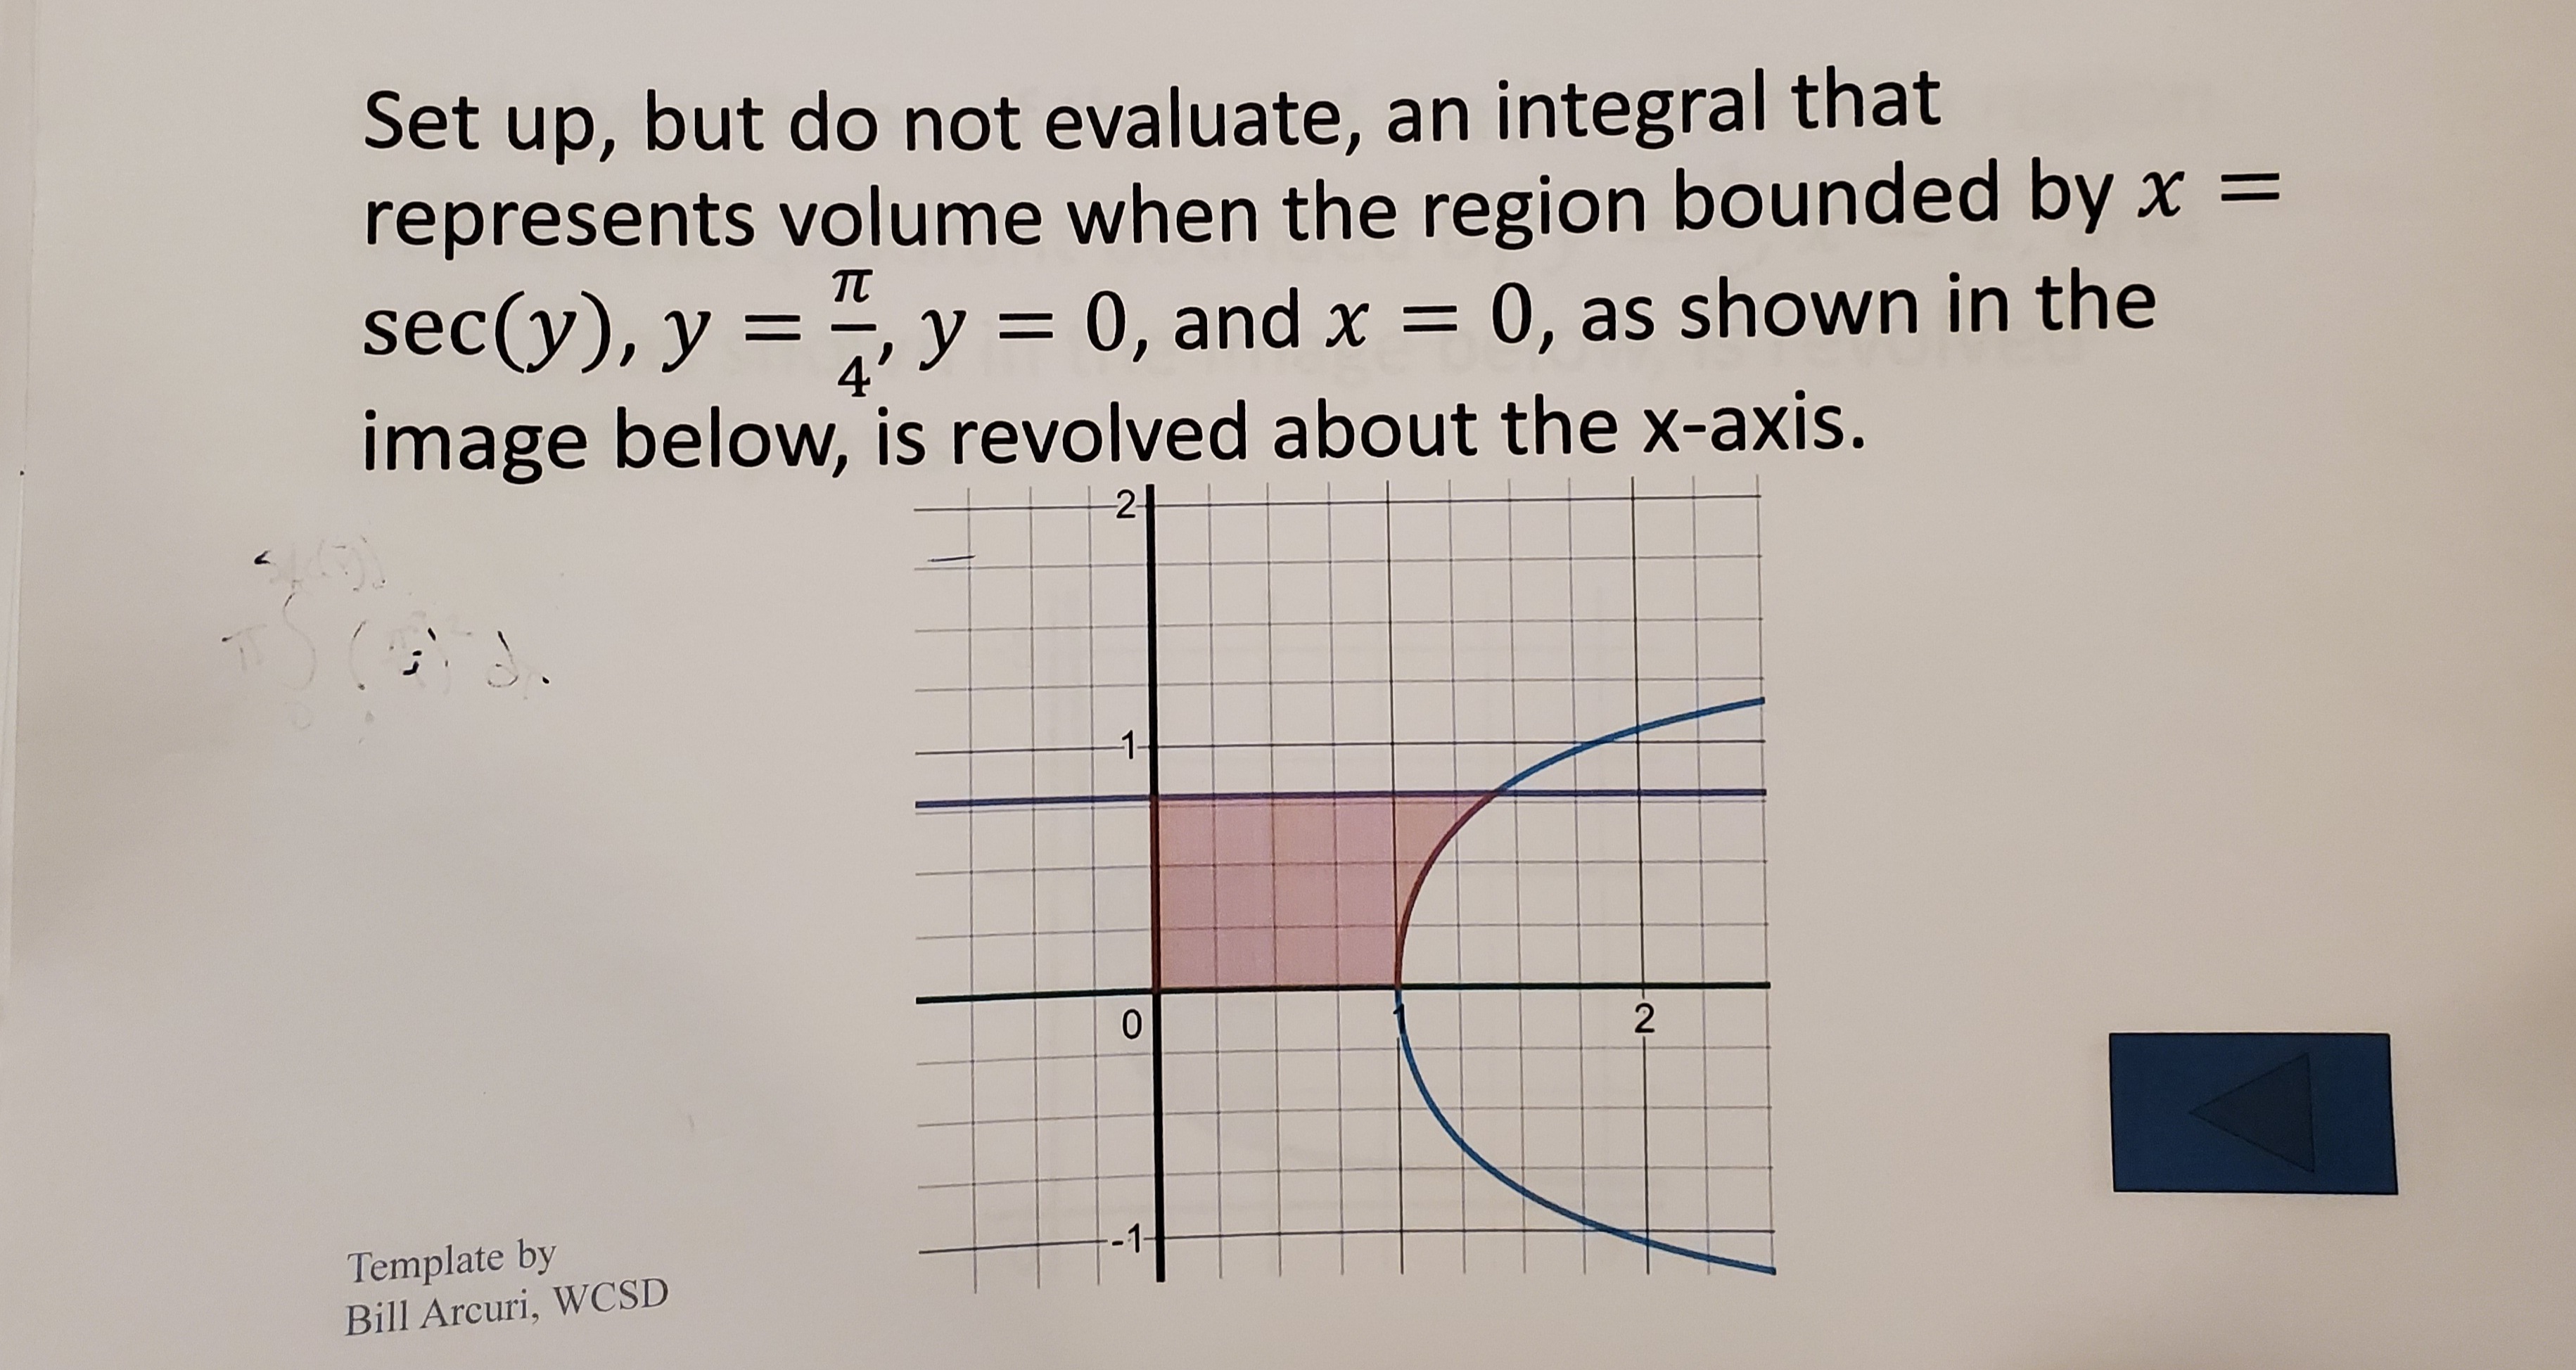 Set up, but do not evaluate, an integral that
represents volume when the region bounded by x =
sec(y), y = “, y = 0, and x = 0, as shown in the
image below, is revolved about the x-axis.
TT
%3D
4'
2-
1-
2
Template by
D'ILA rcuri. WCSD
-1-
